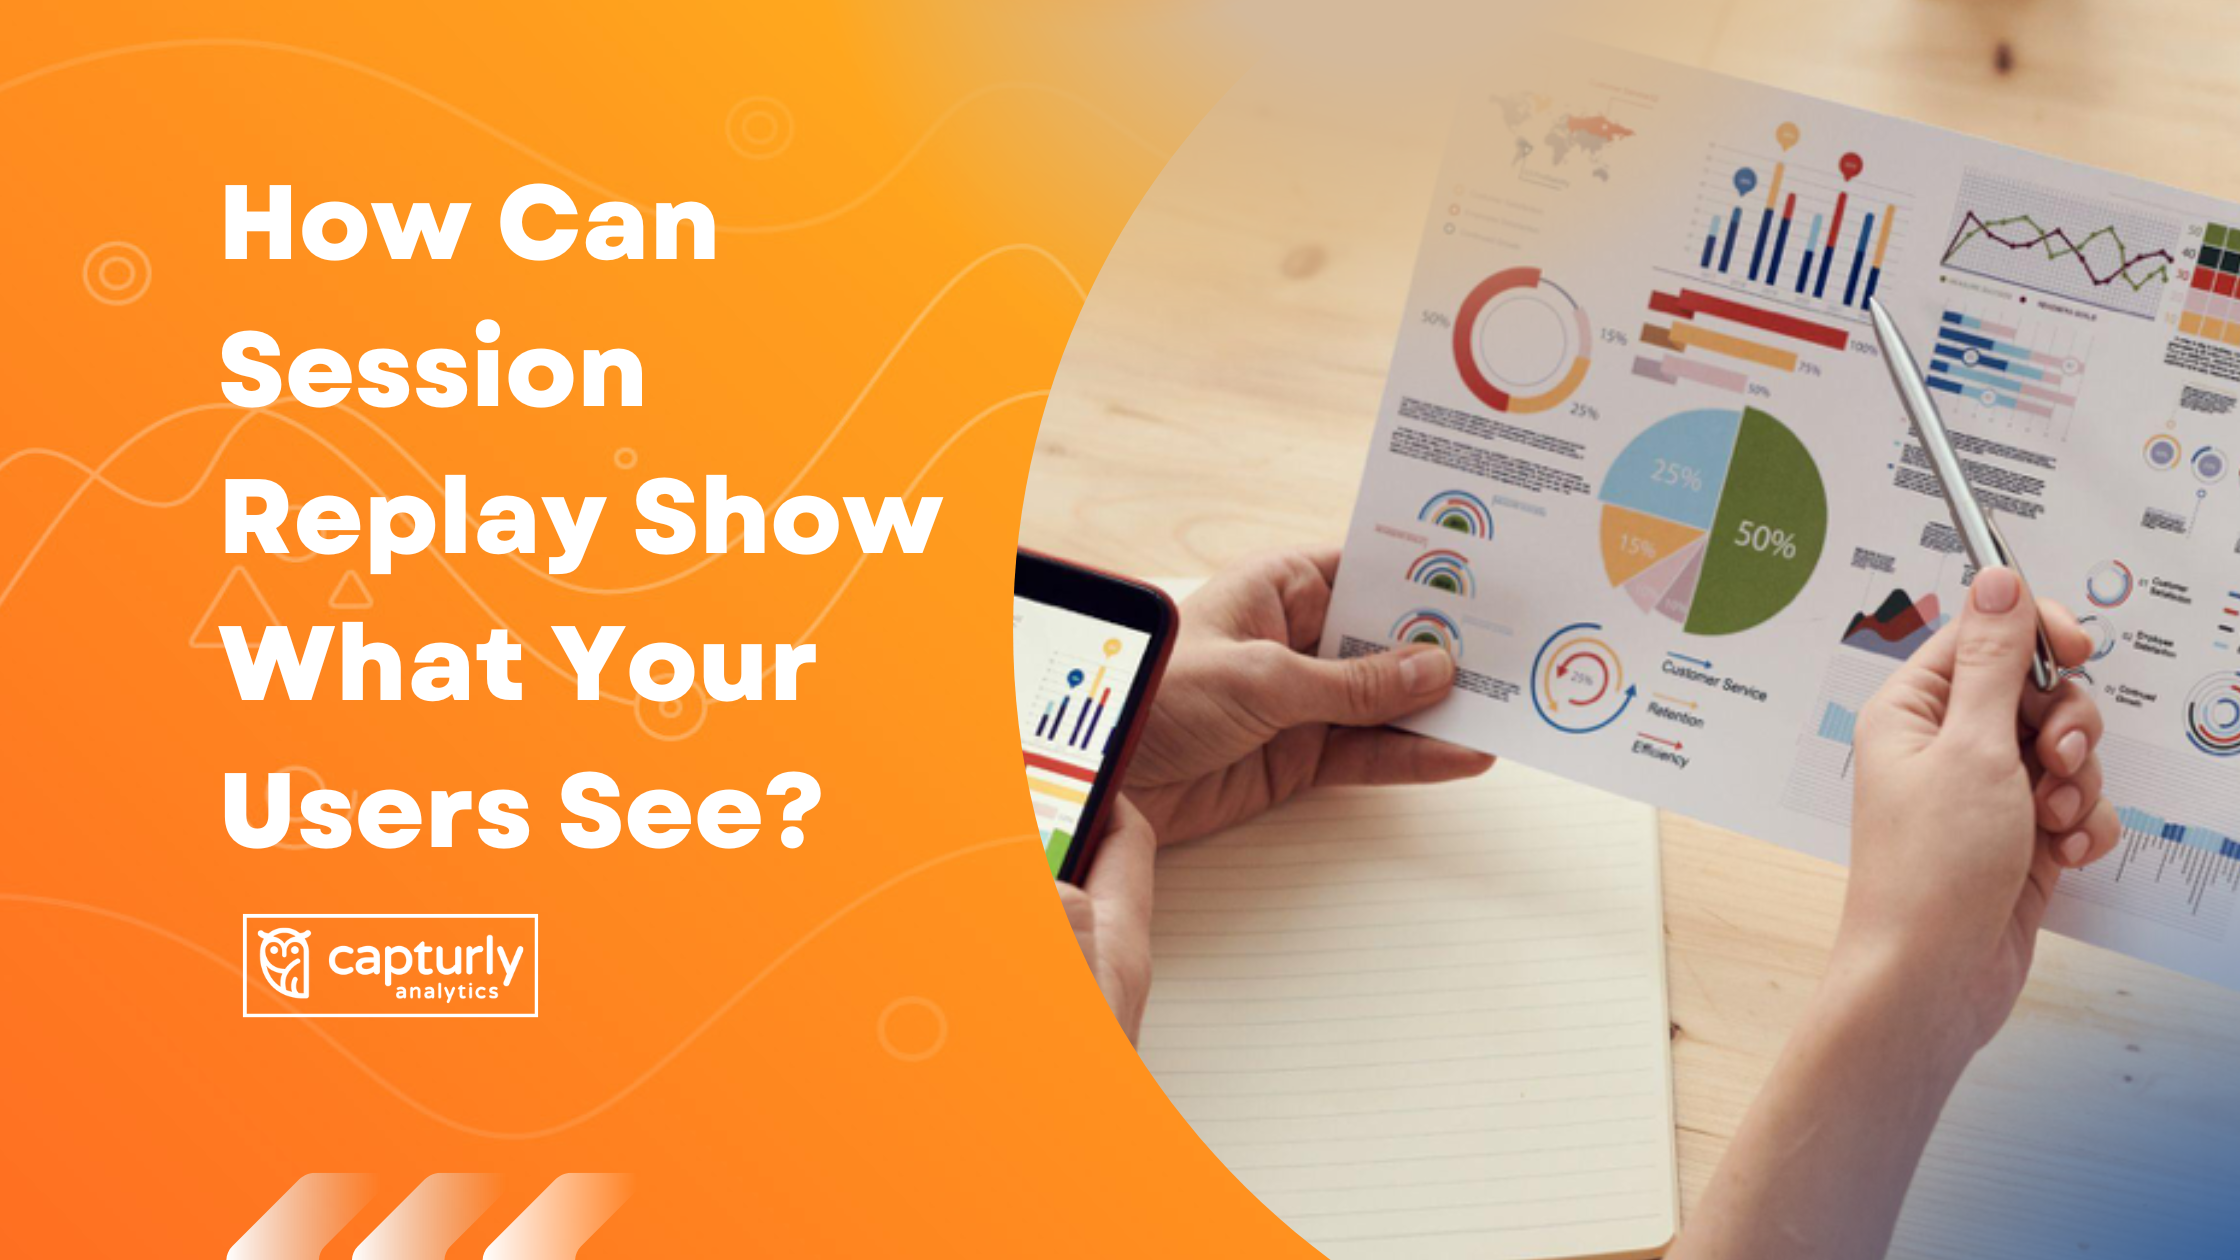 How Can Session Replay Show What Your Users See?